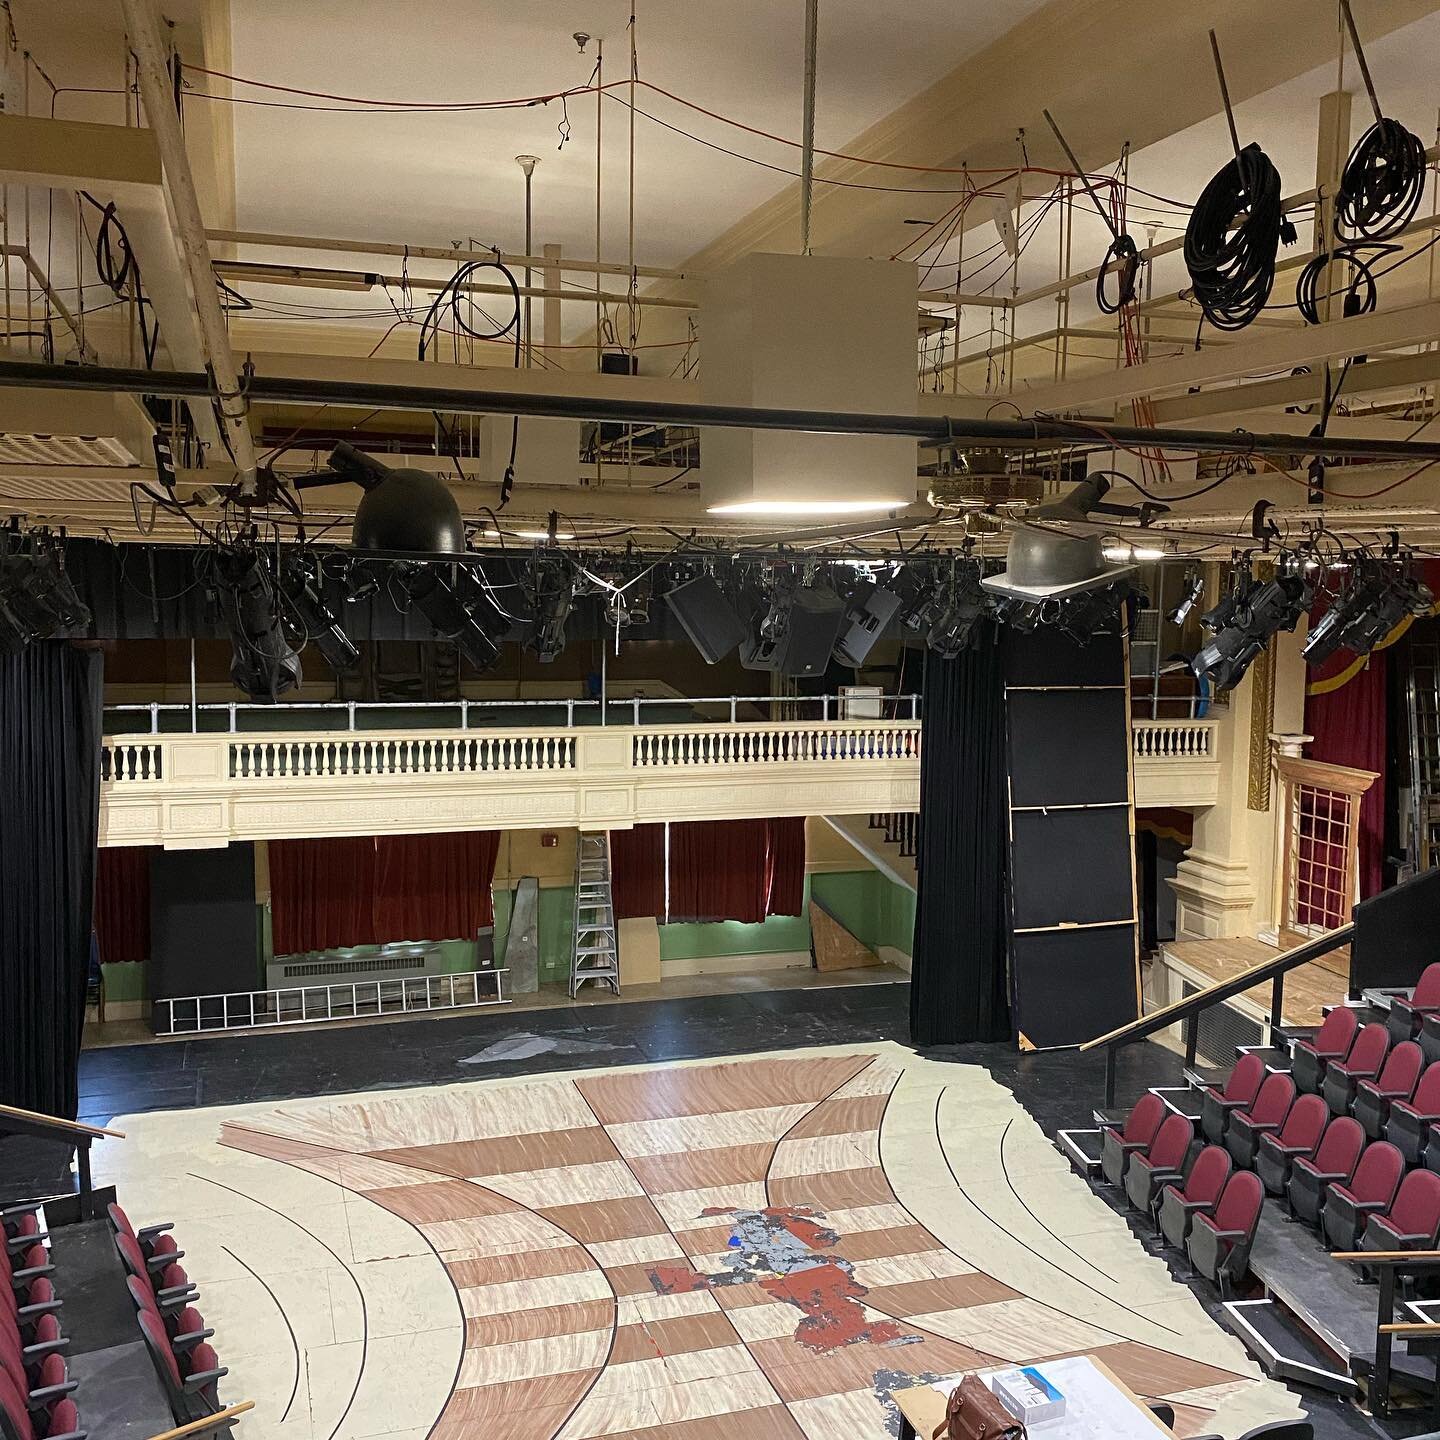 The apparent last load-in of the spring. Ready to go for Summer 2020 at LNT #lighting